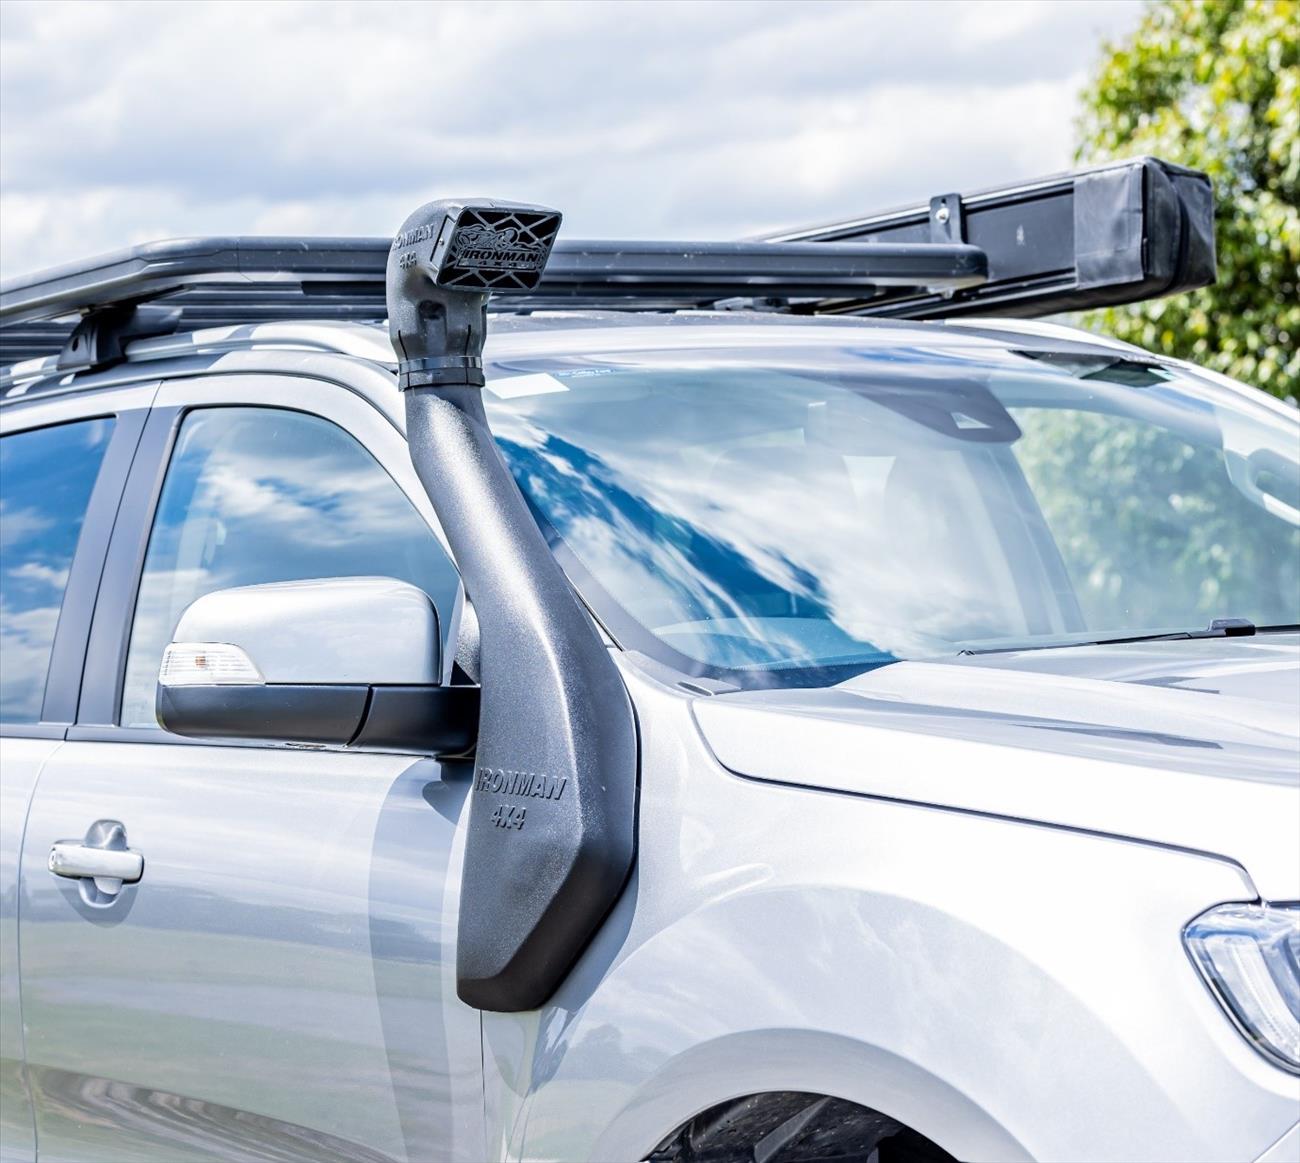 Why Should You Consider Getting a Snorkel Kit for Your Ford Ranger?